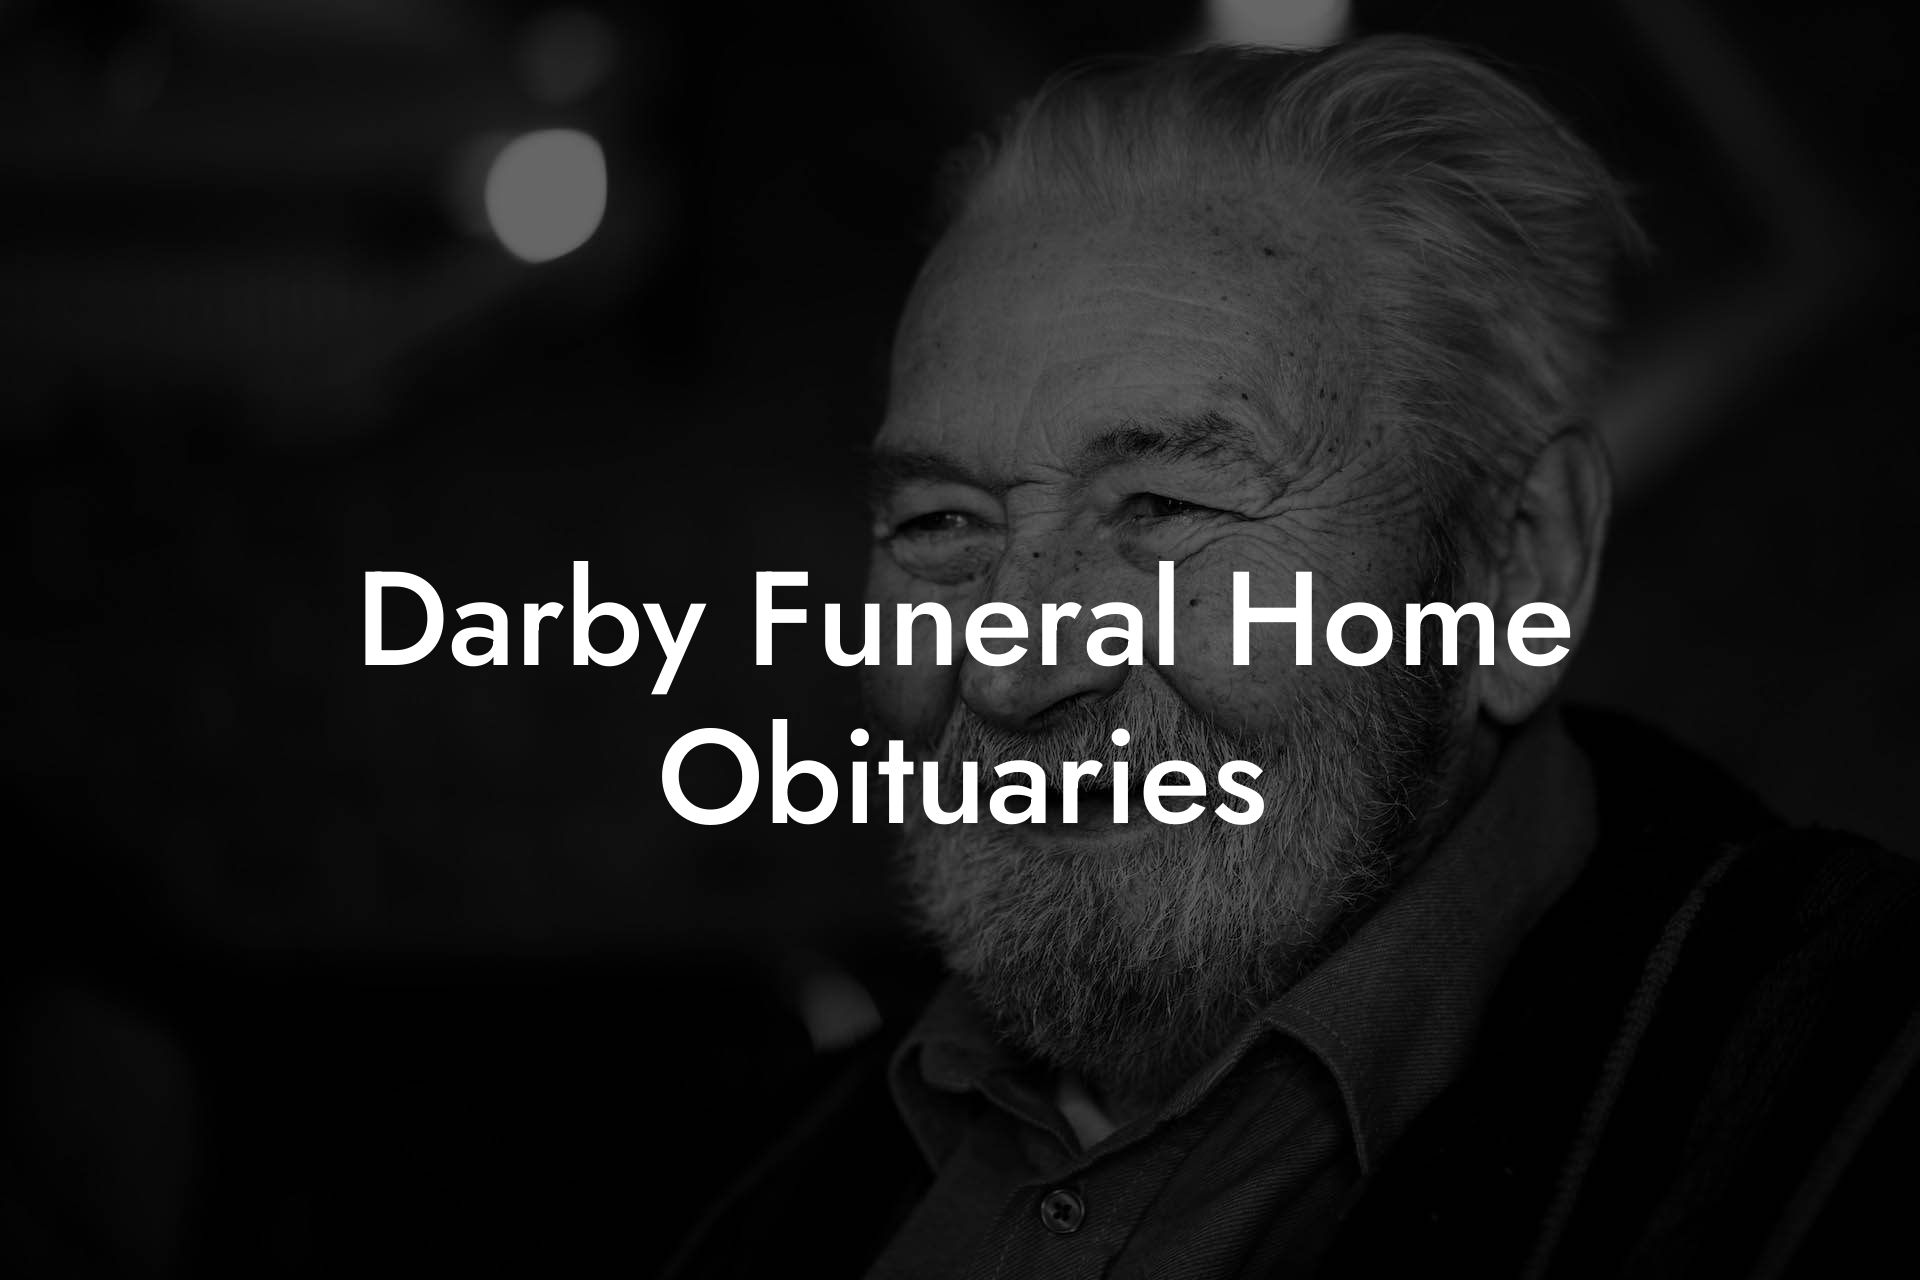 Darby Funeral Home Obituaries